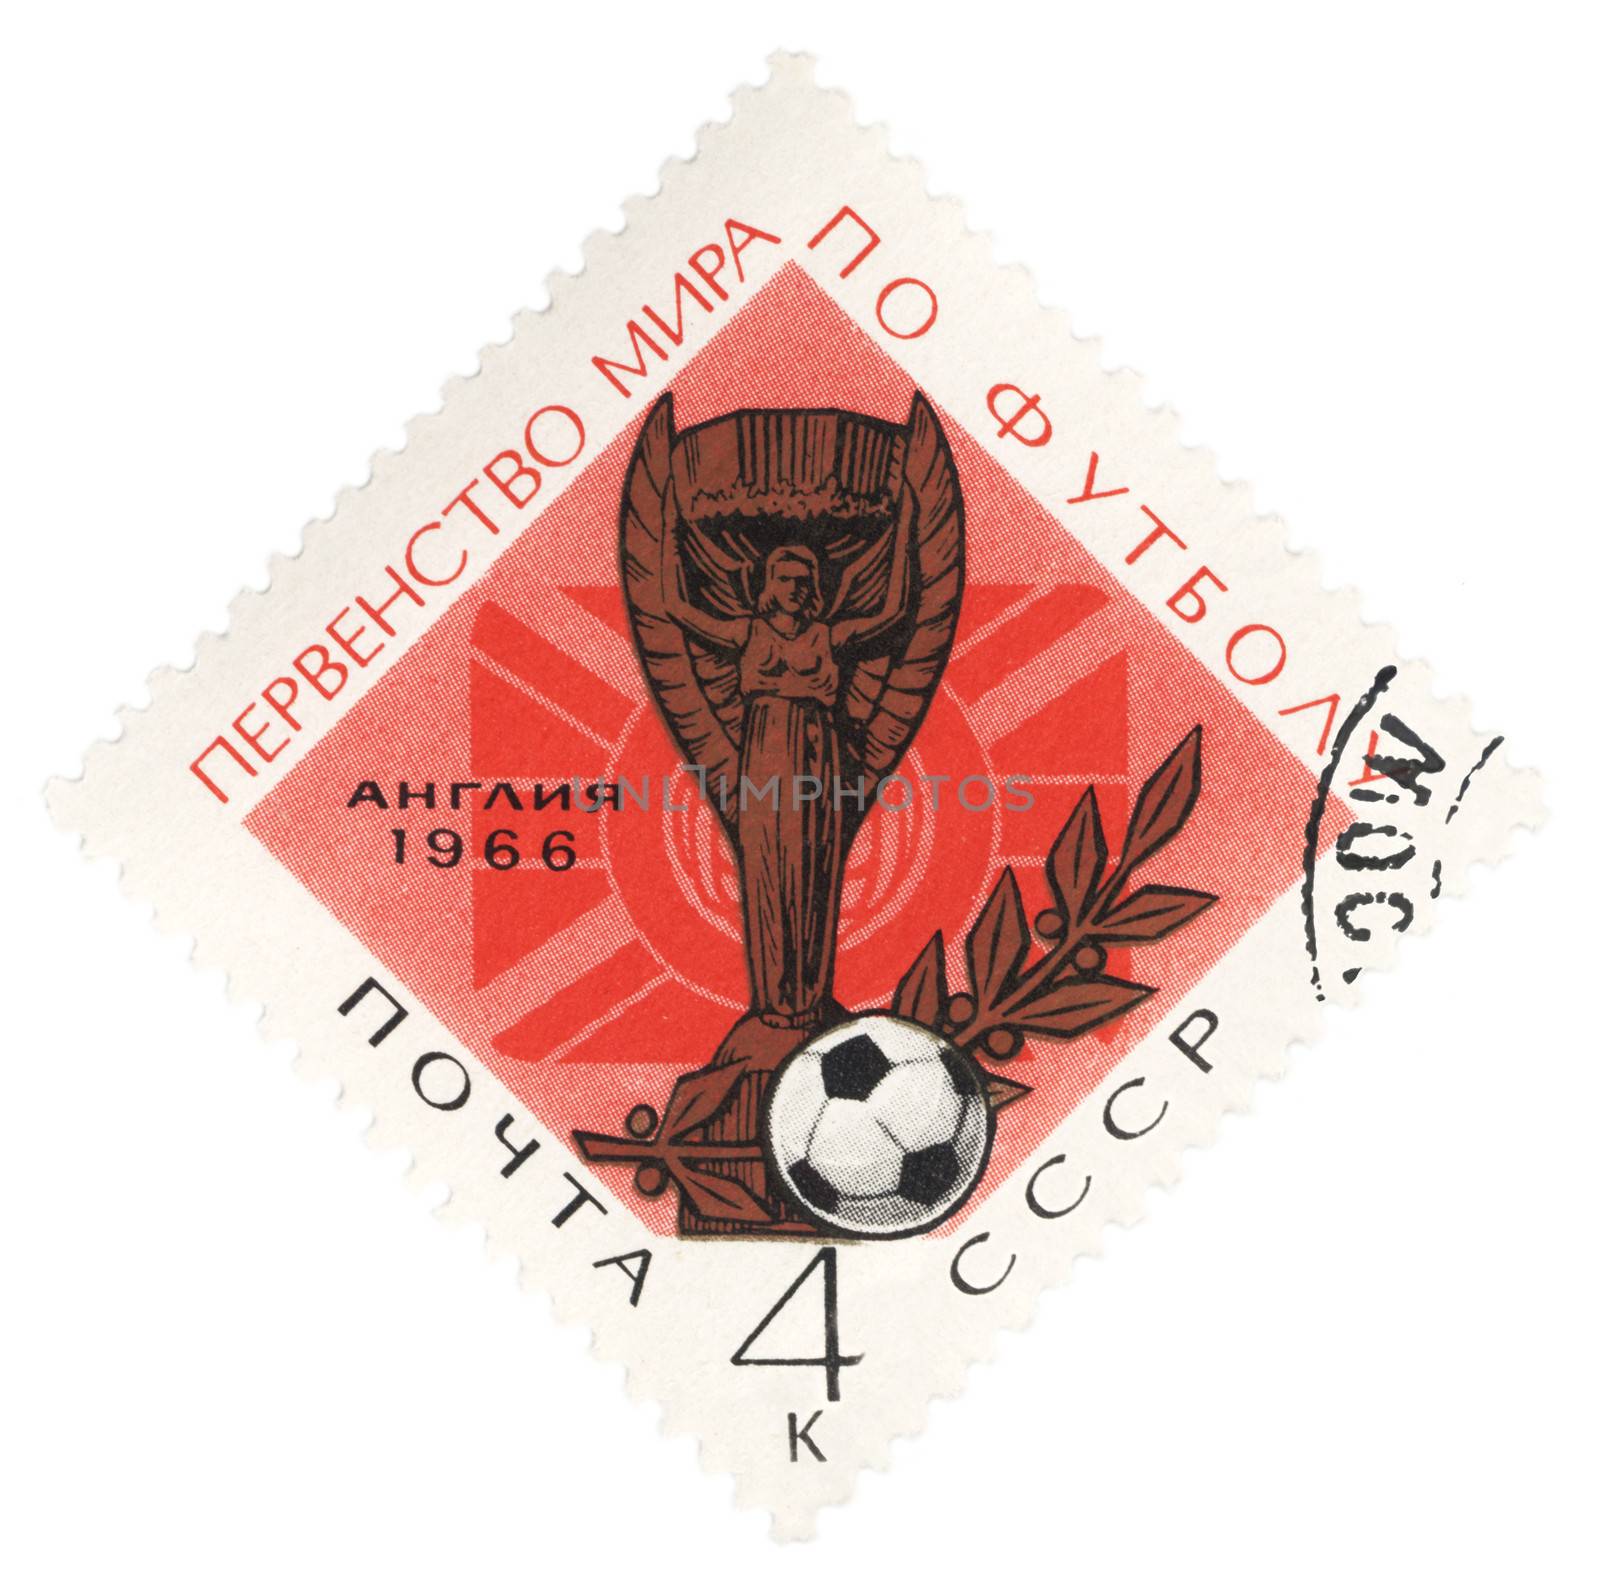 Goddess of victory Nike Cup on post stamp by wander